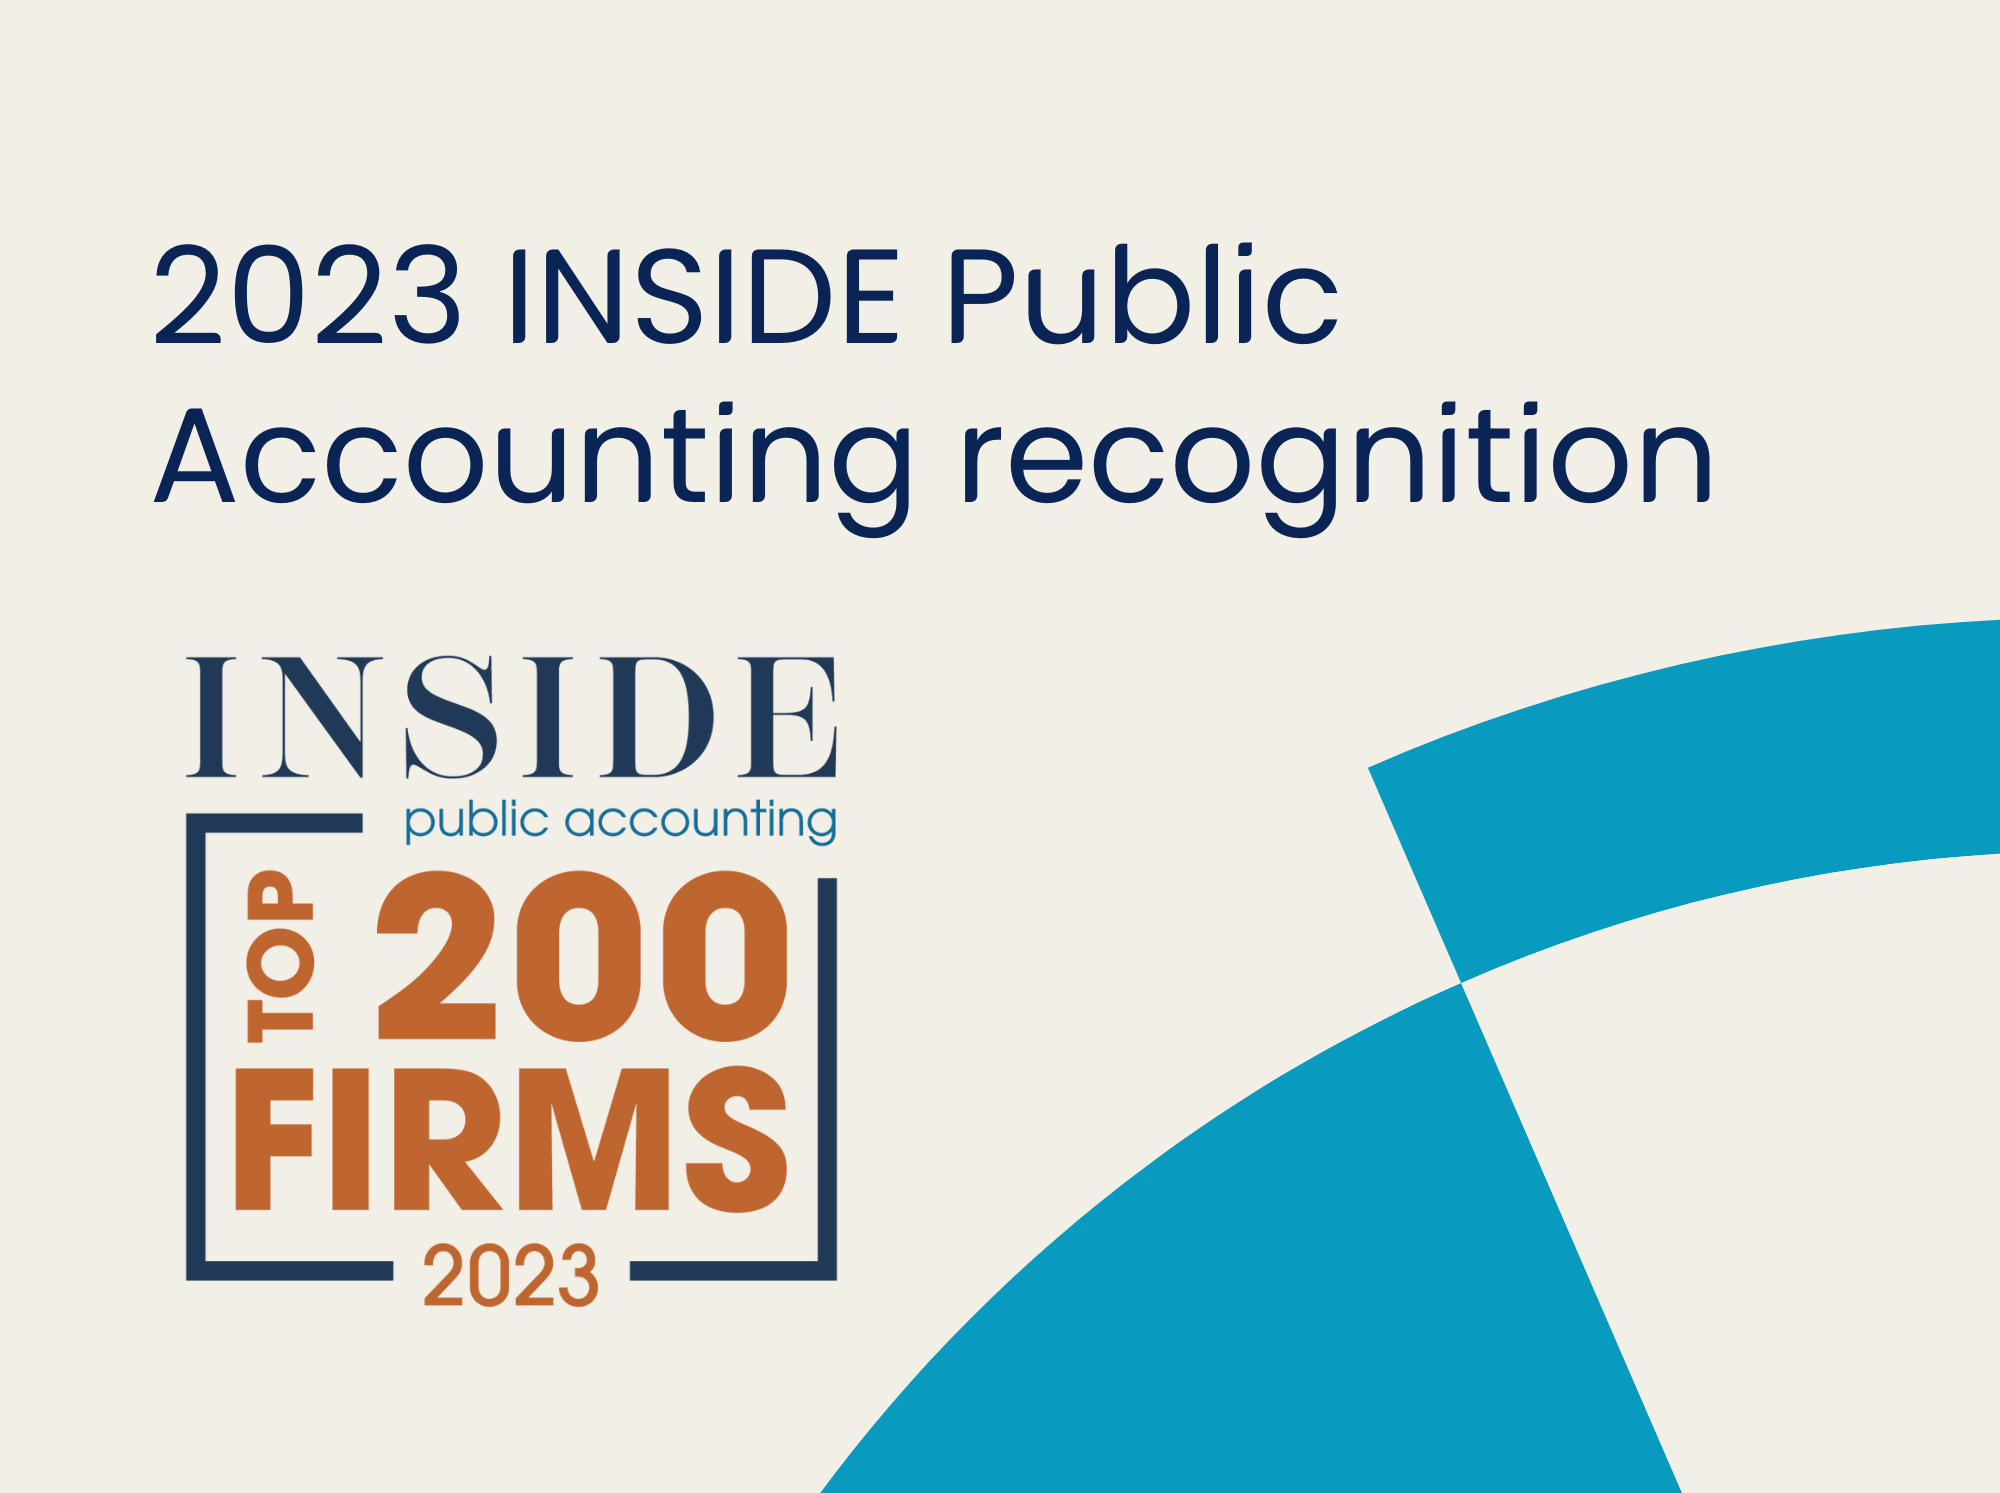 2023 INSIDE Public Accounting recognition